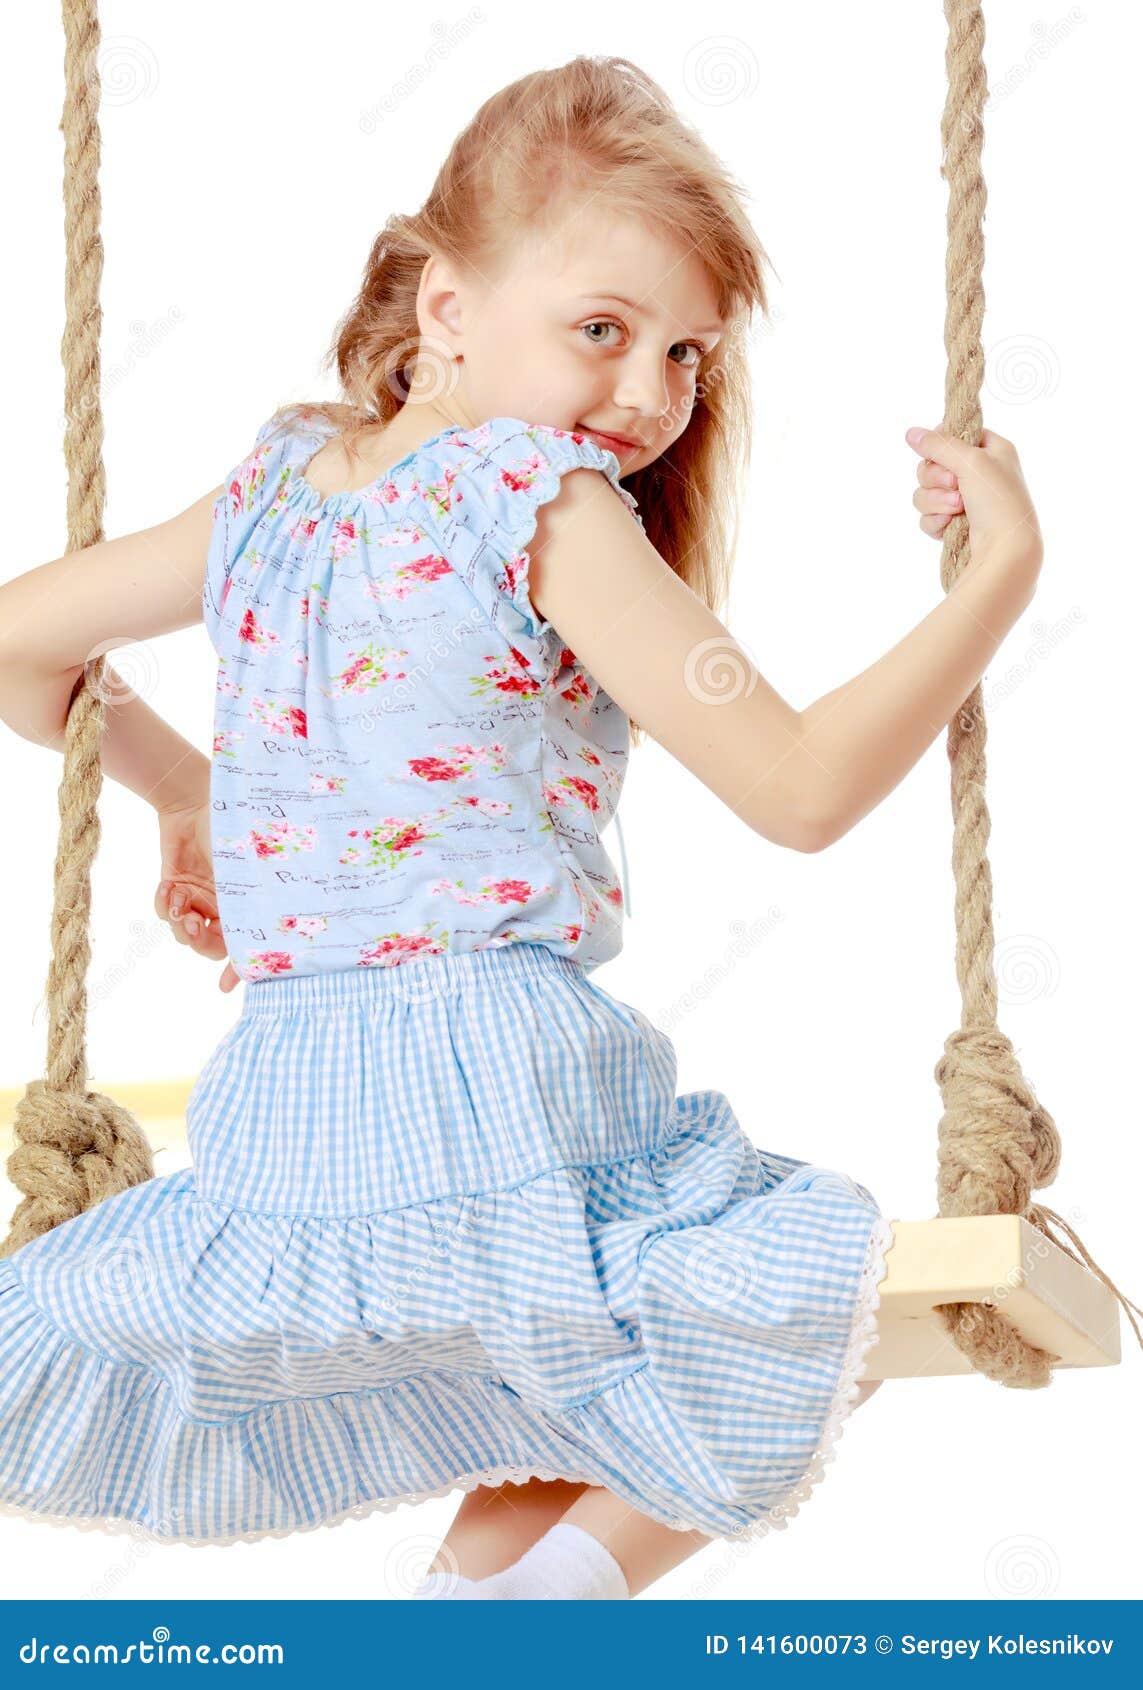 Little Girl Swinging on a Swing Stock Image - Image of play, child ...